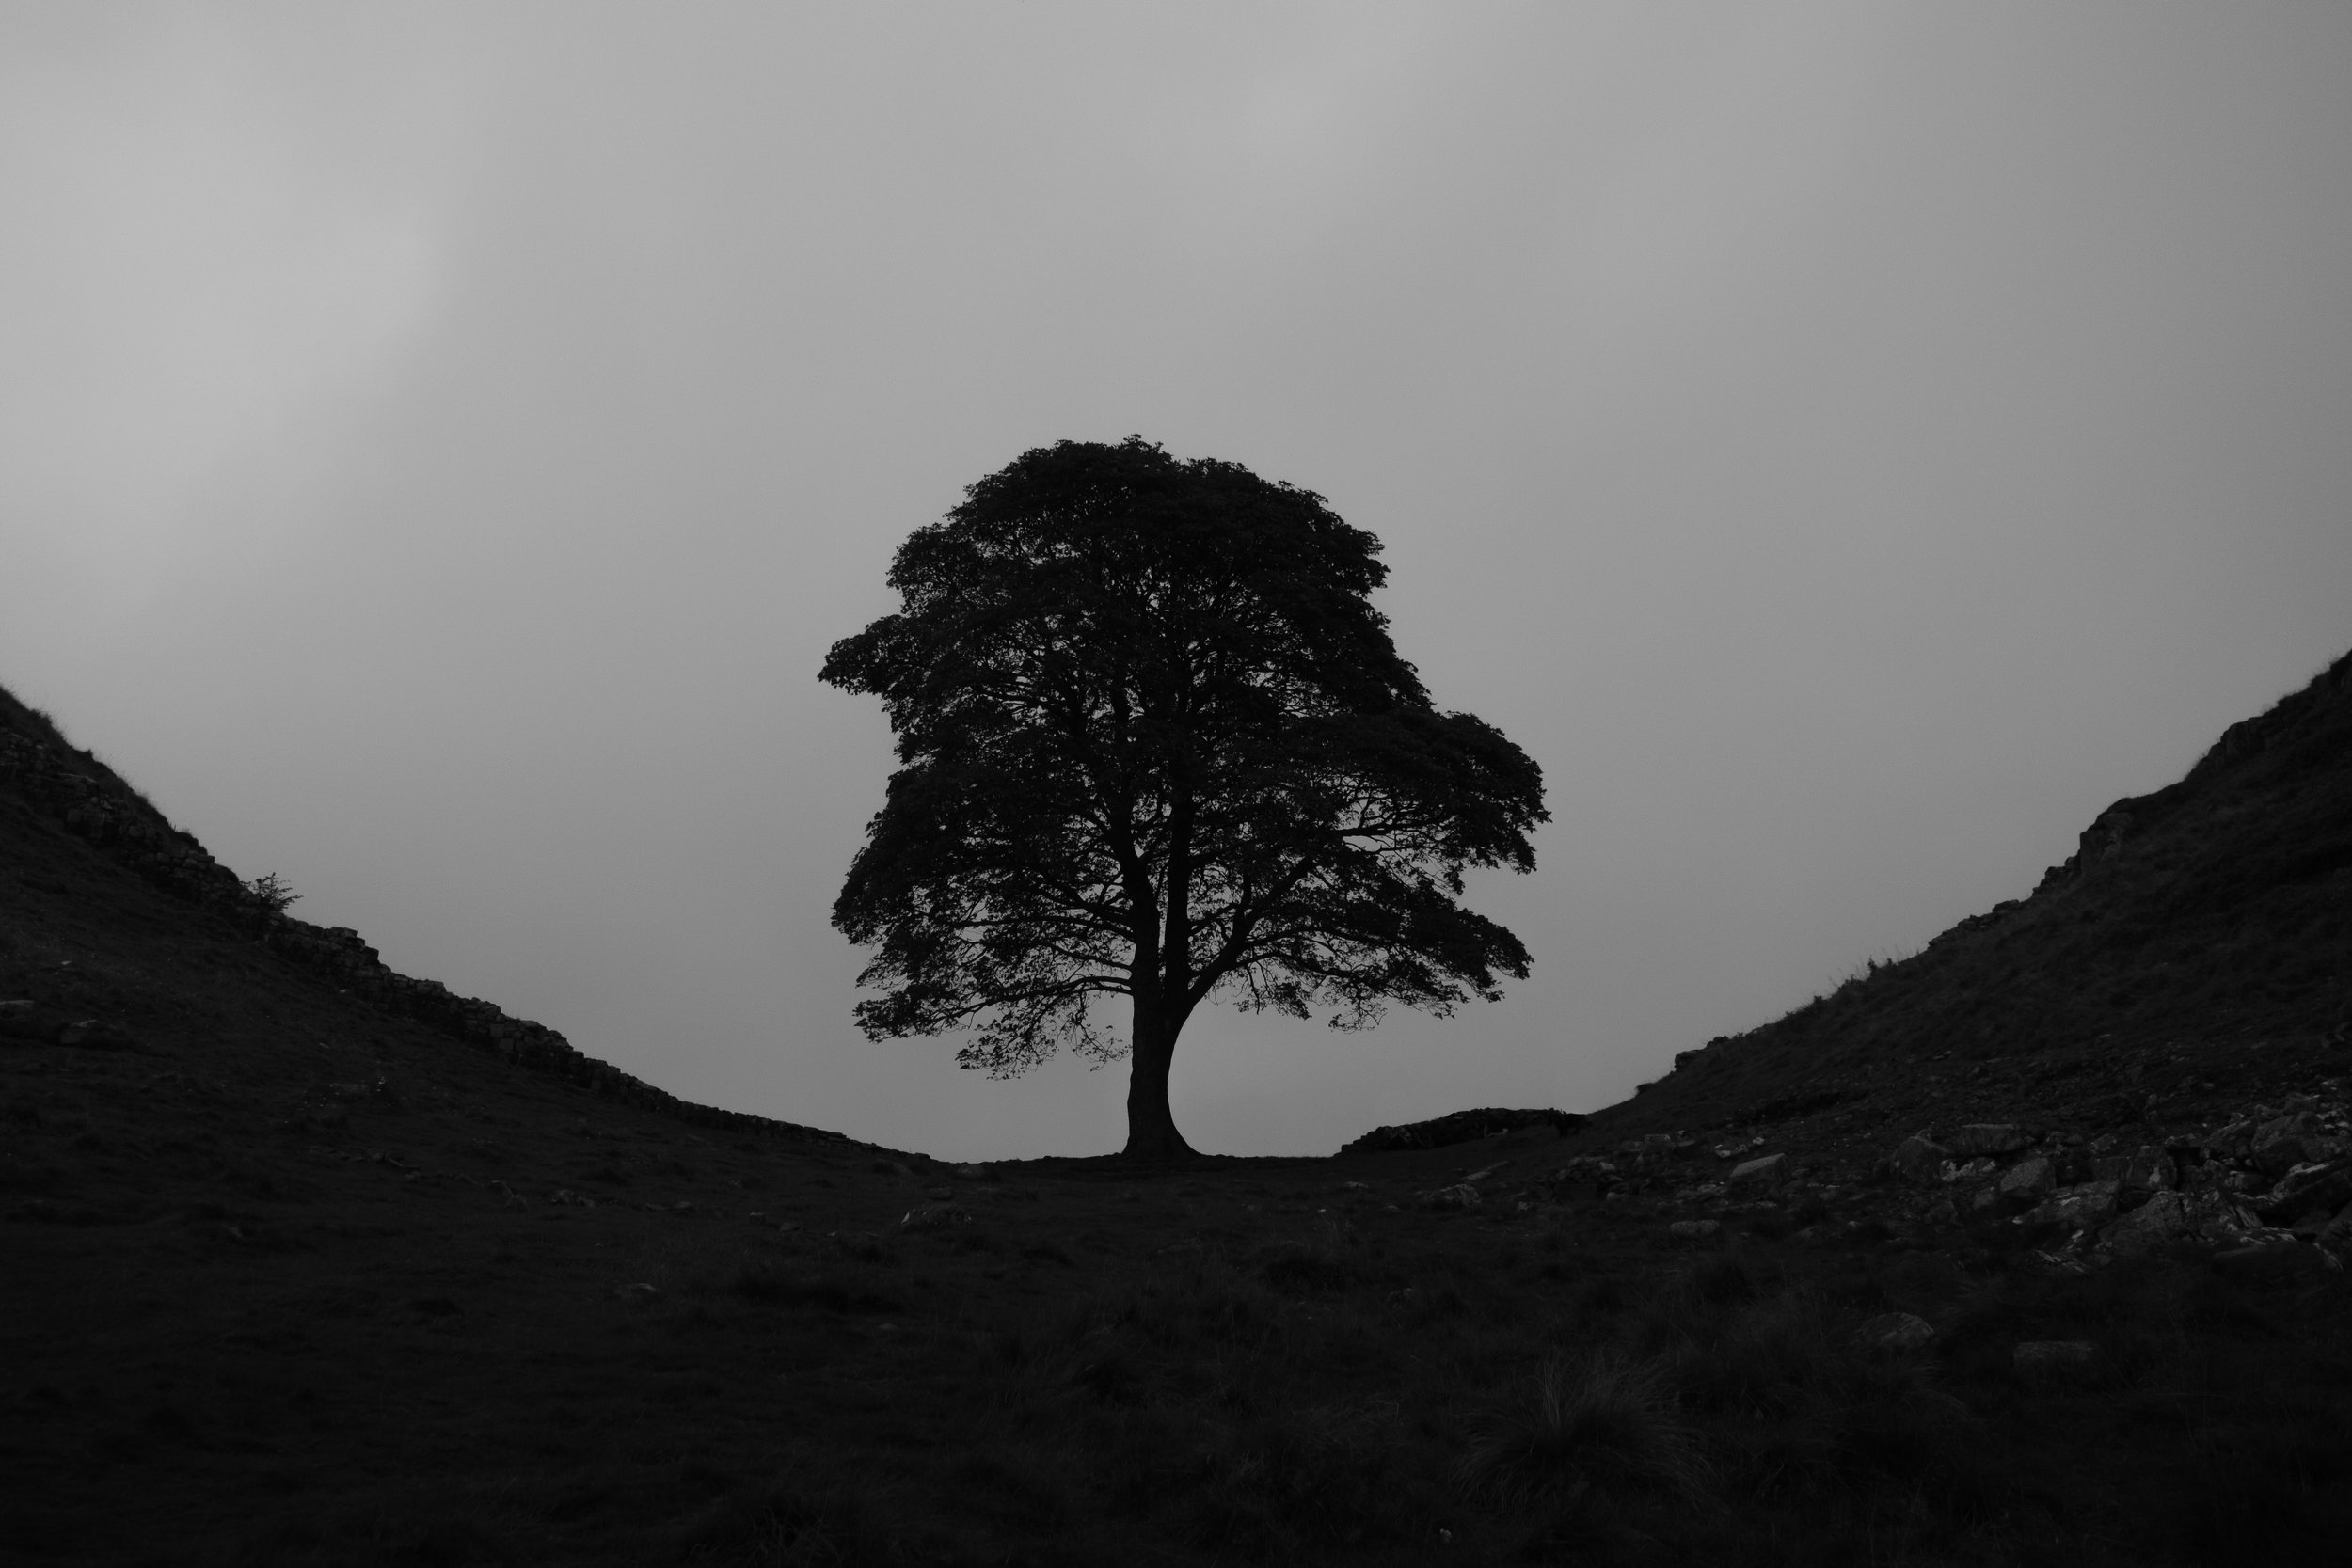 11 AM: Shotover Hill: Oak Tree, 12 Month Exposure' by Ian Dudley